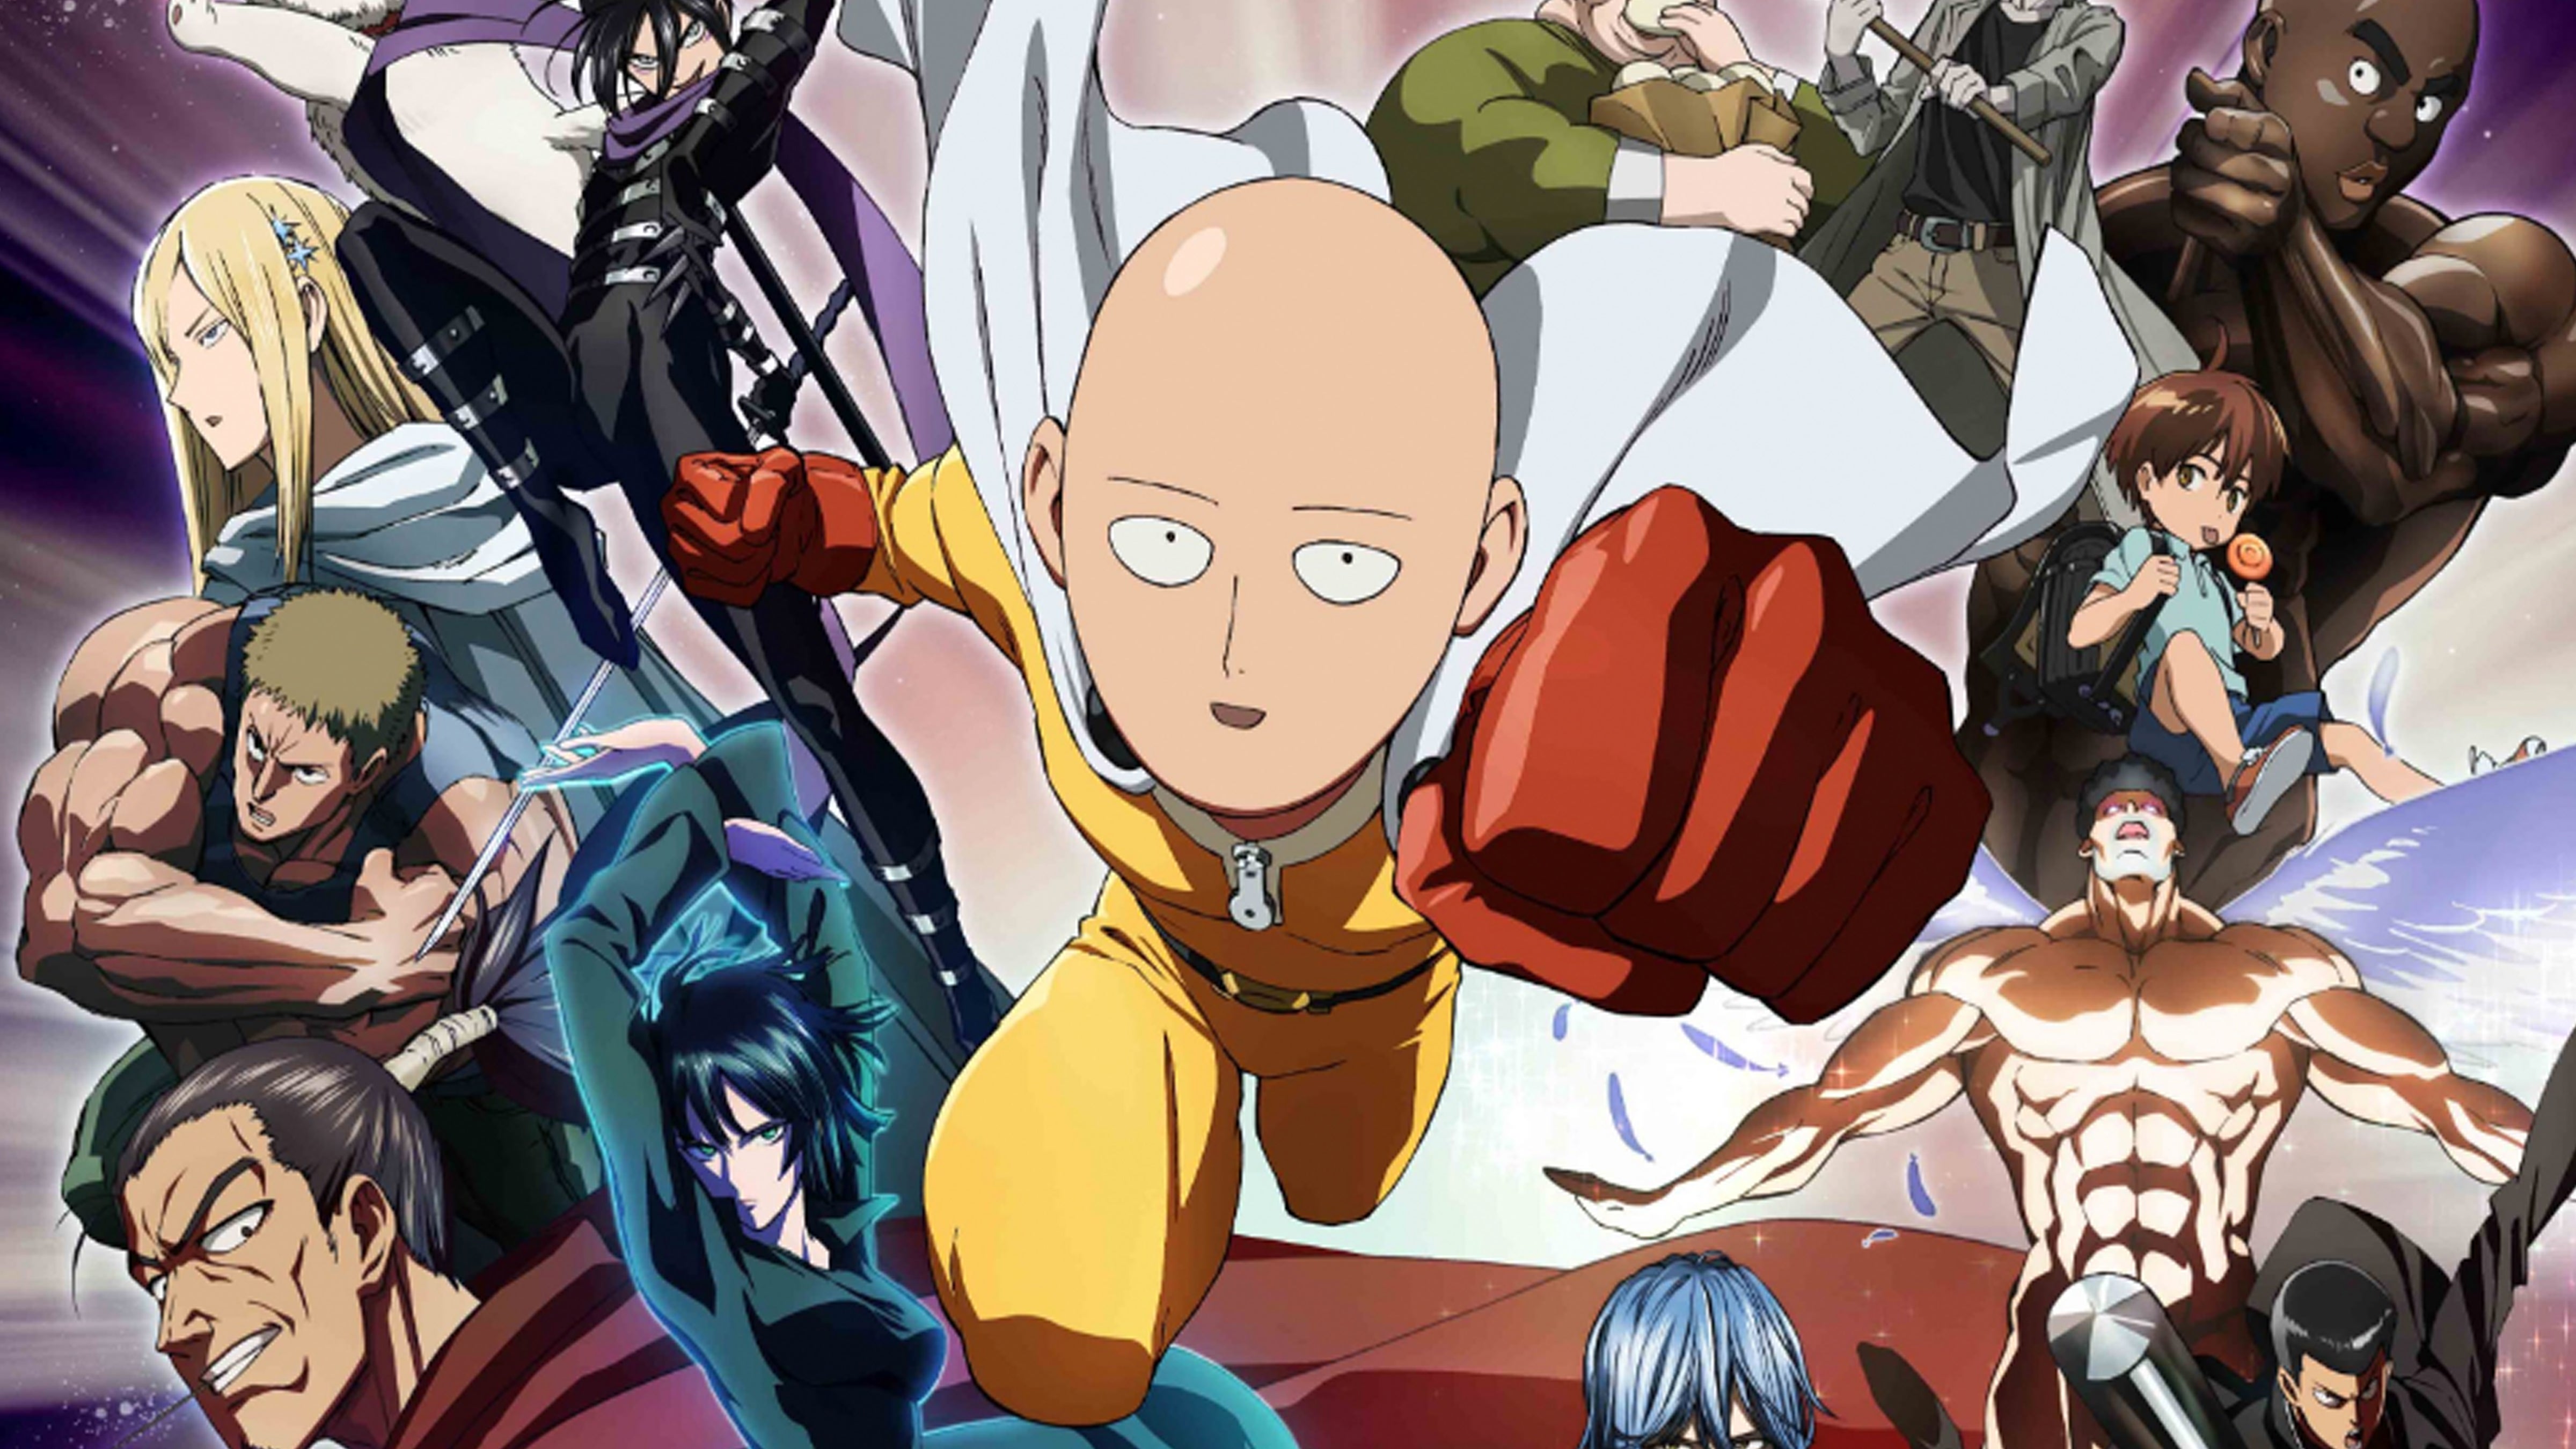 Times Comic Saitama Poster | One Punch Man Saitama Epic Fight Anime Poster  | Saitama Wall Poster One Punch Man : Amazon.in: Home & Kitchen